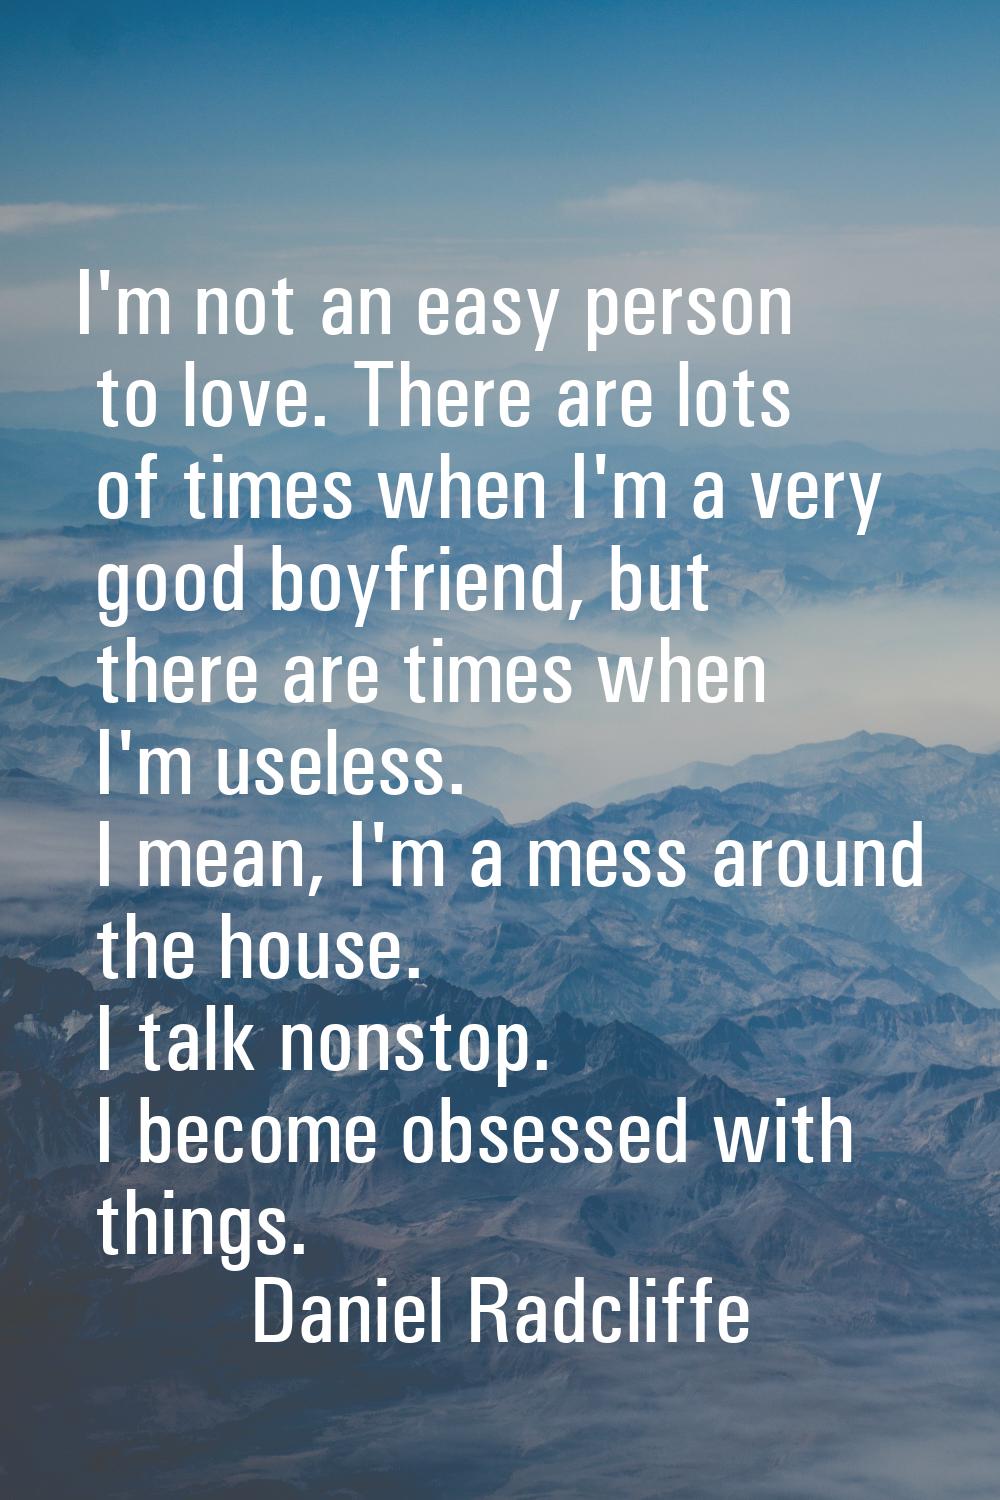 I'm not an easy person to love. There are lots of times when I'm a very good boyfriend, but there a